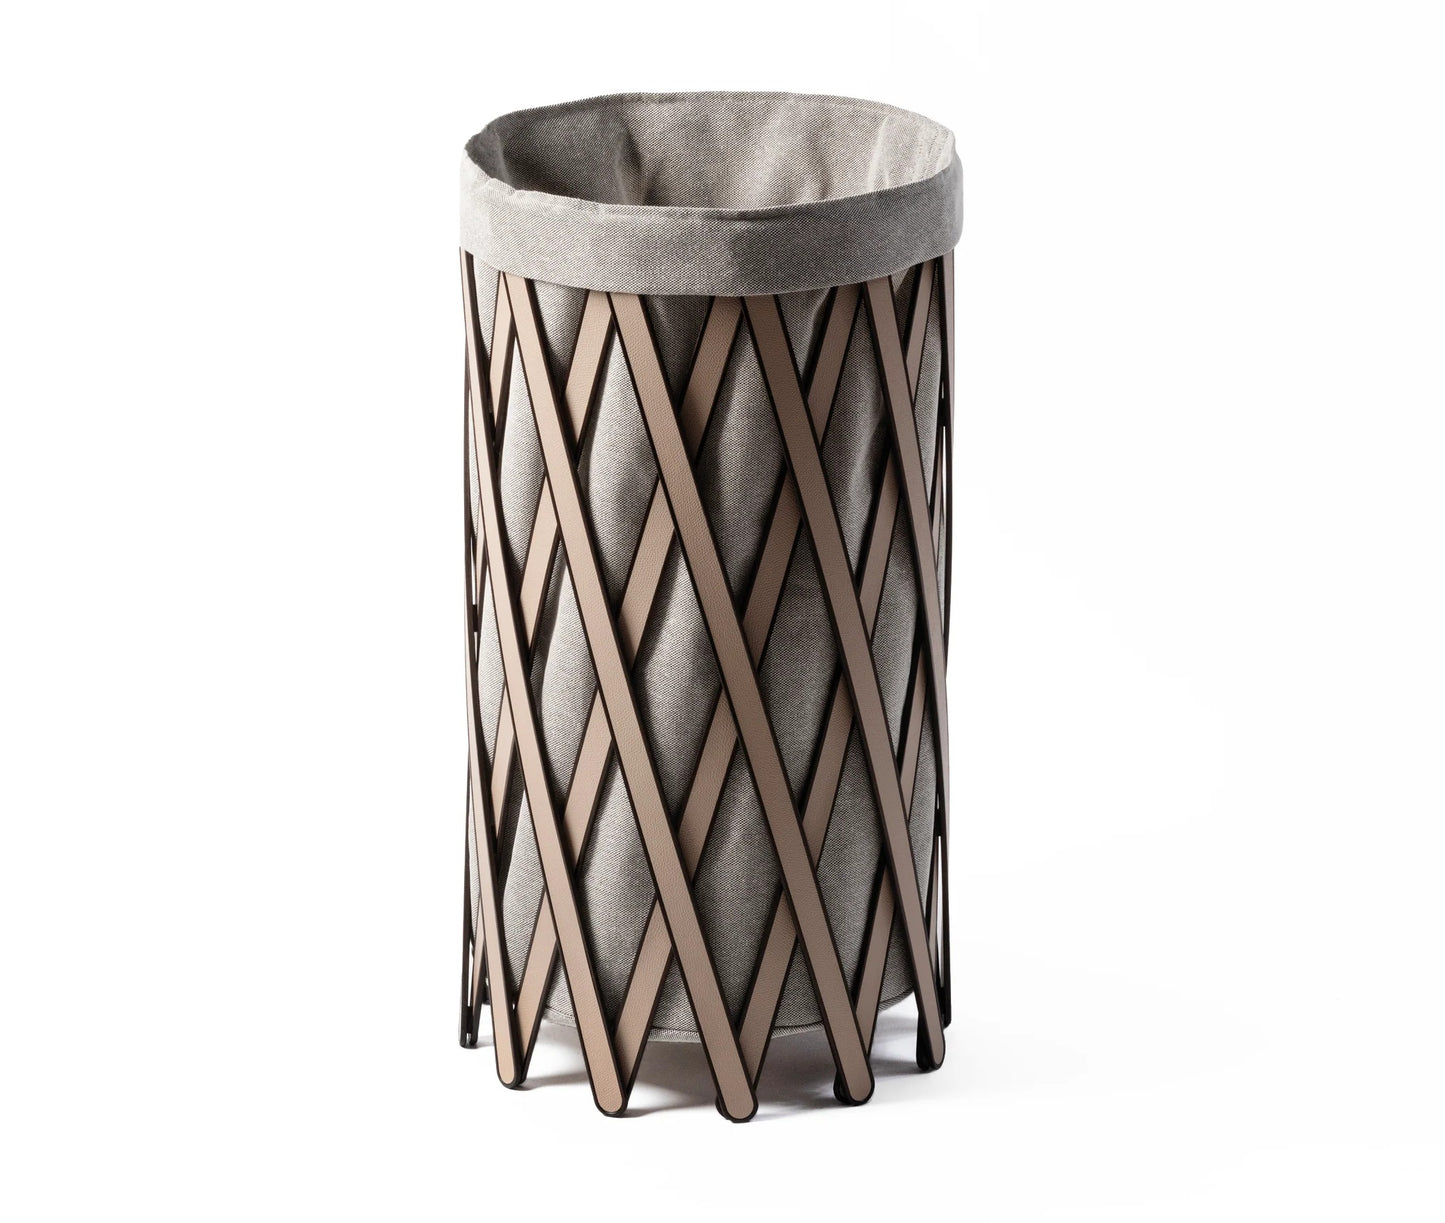 Safari Laundry Basket by Pinetti | Wooden foldable structure covered with leather | Inside fabric in linen and cotton is removable and washable | Designer: Antonio De Marco | Home Organization and Laundry Baskets | 2Jour Concierge, your luxury lifestyle shop